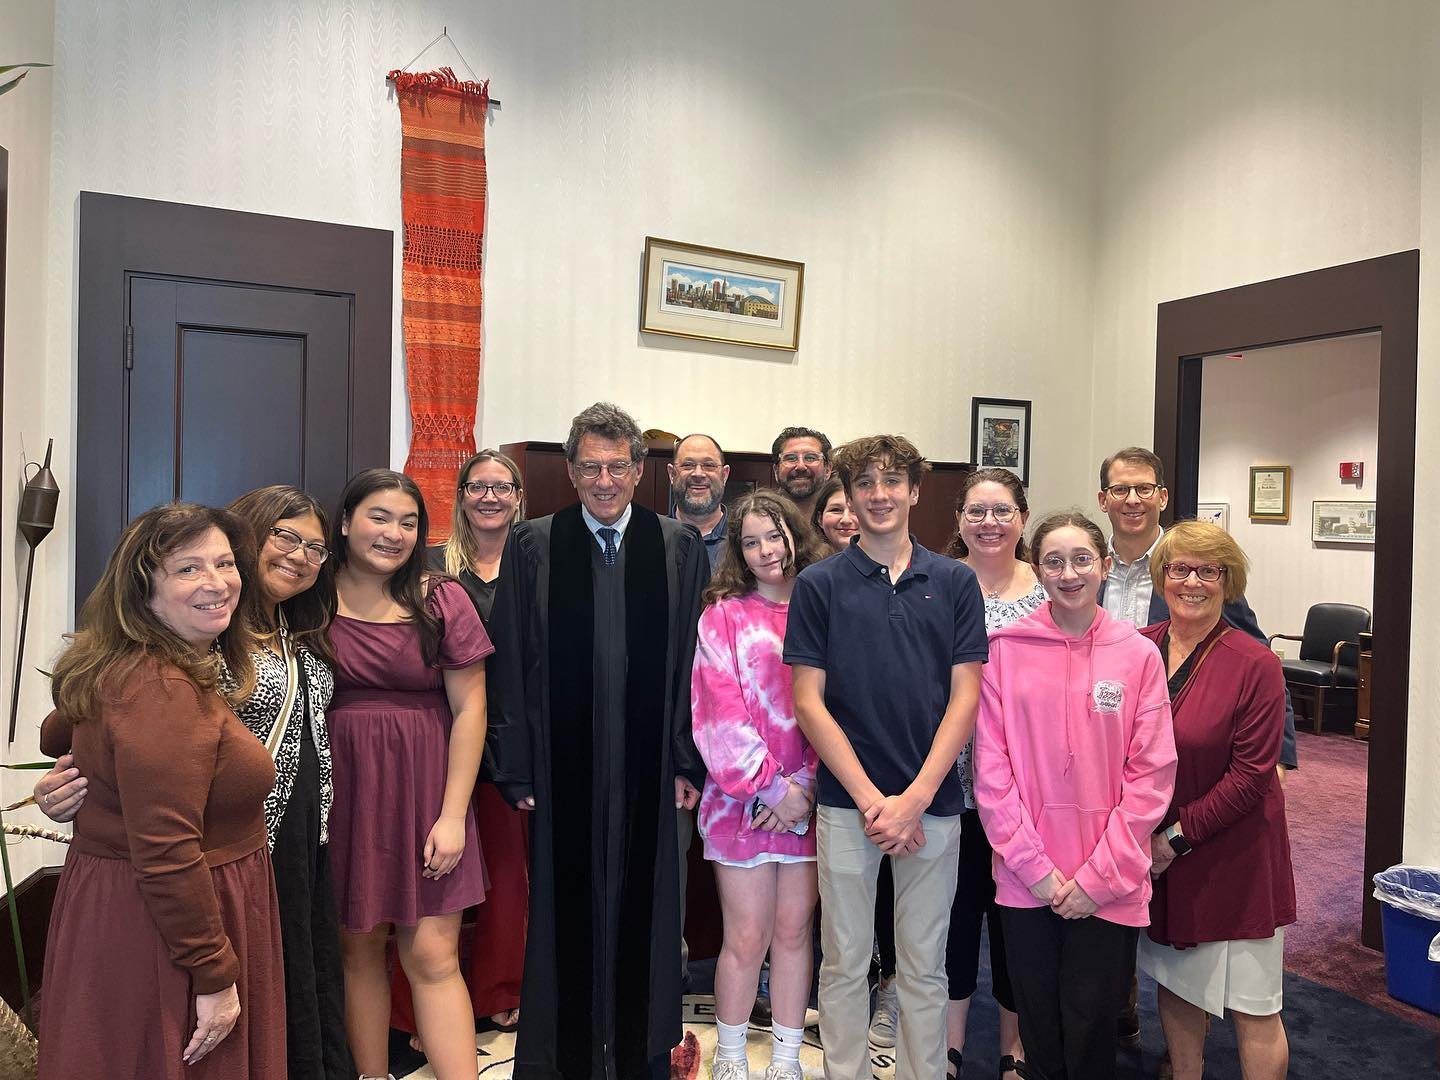 The Confirmation Class visited the Federal Courthouse with Judge Dan Polster to learn about the Justice System in action.